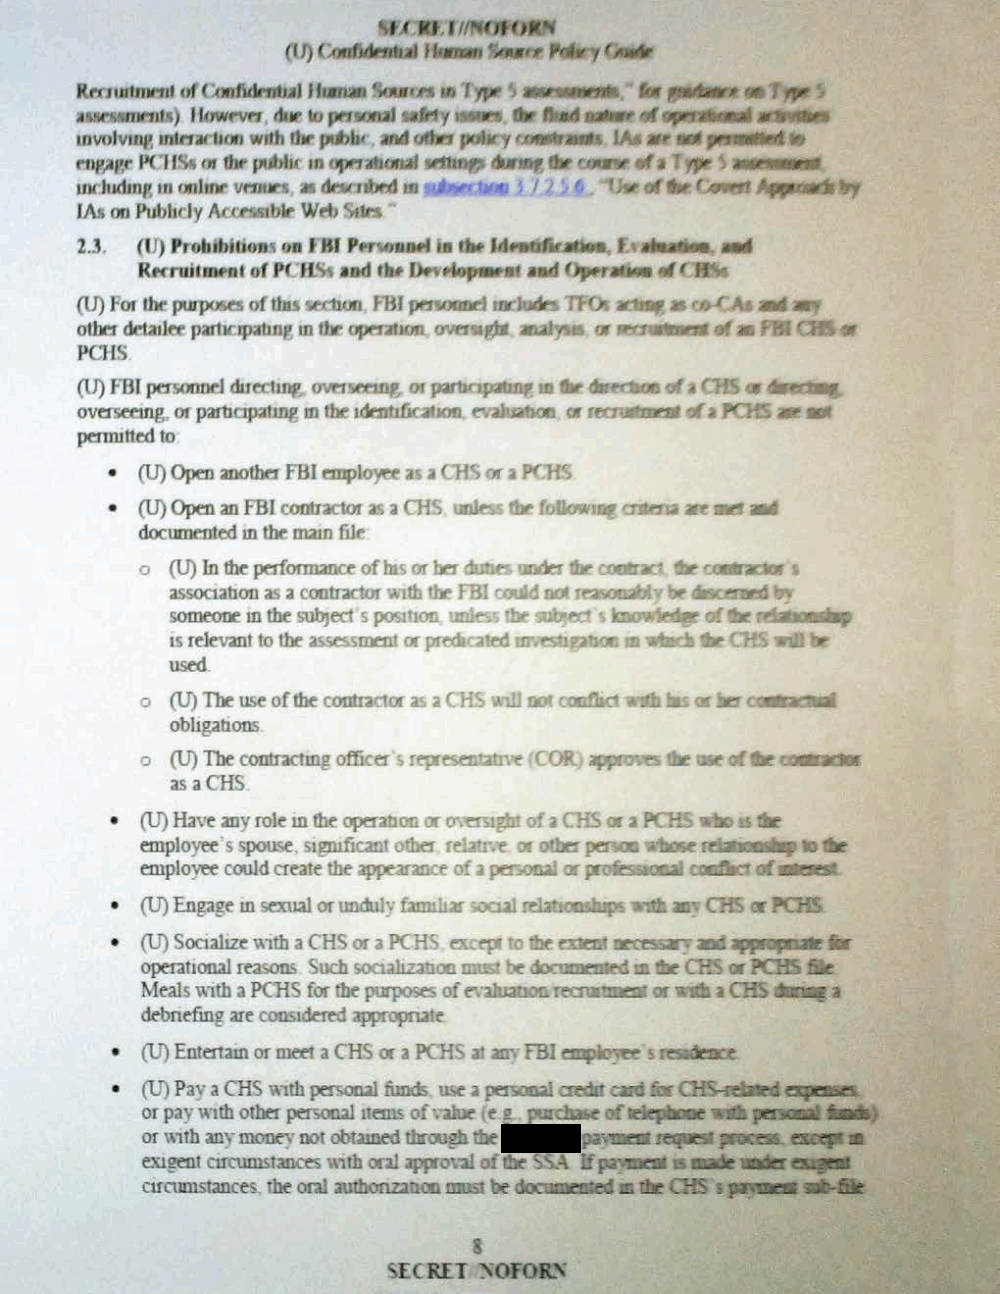 Page 20 from Confidential Human Source Policy Guide